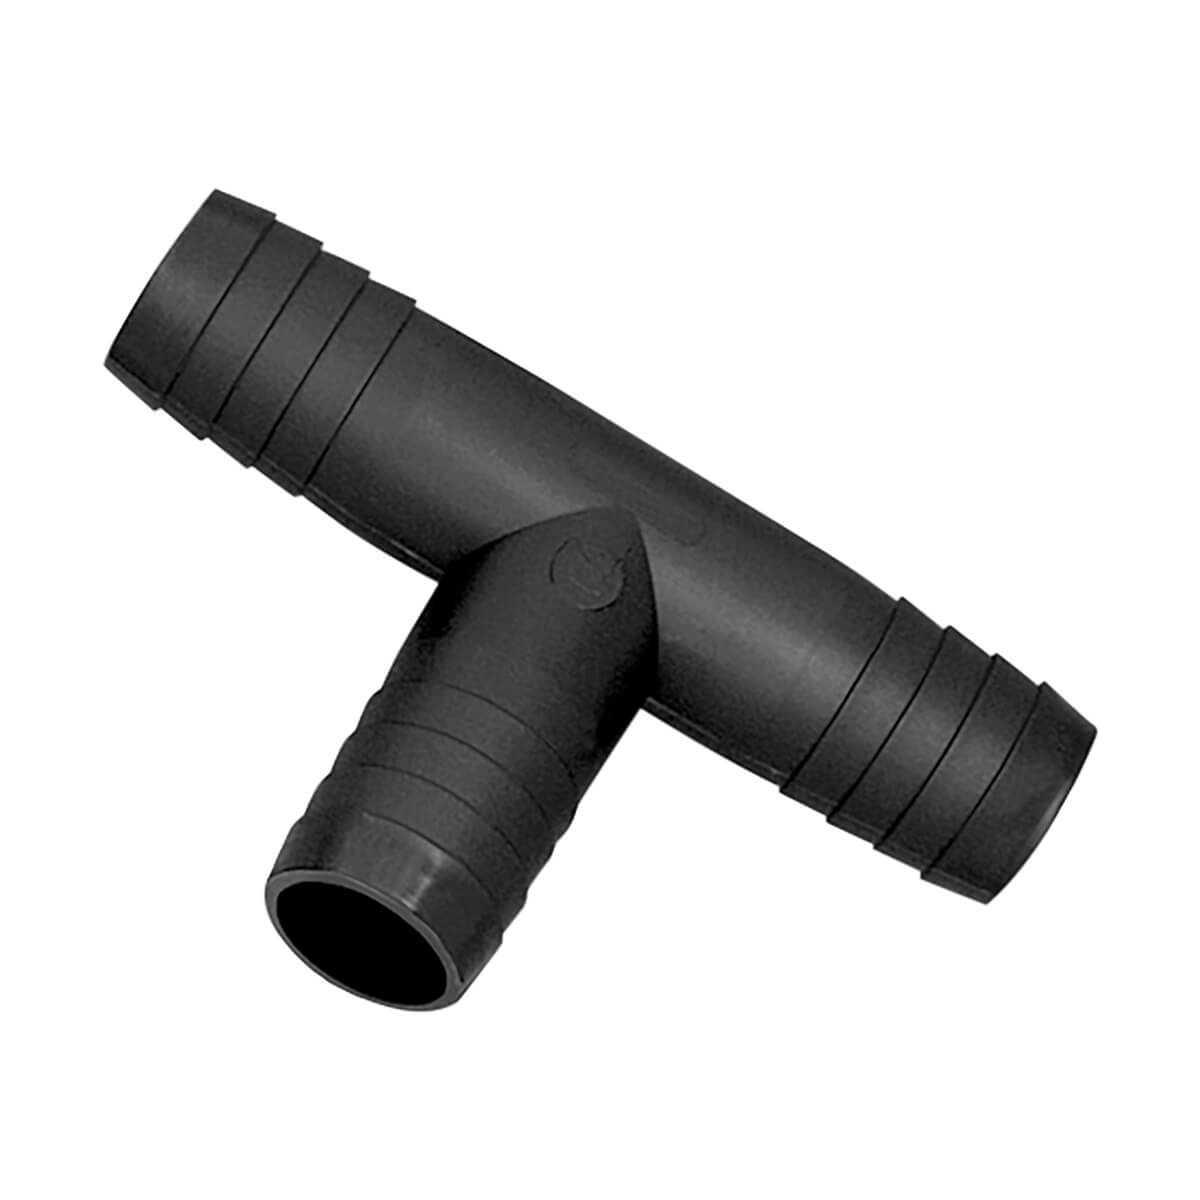 Insert Tee 1-1/4-in Hose Barb